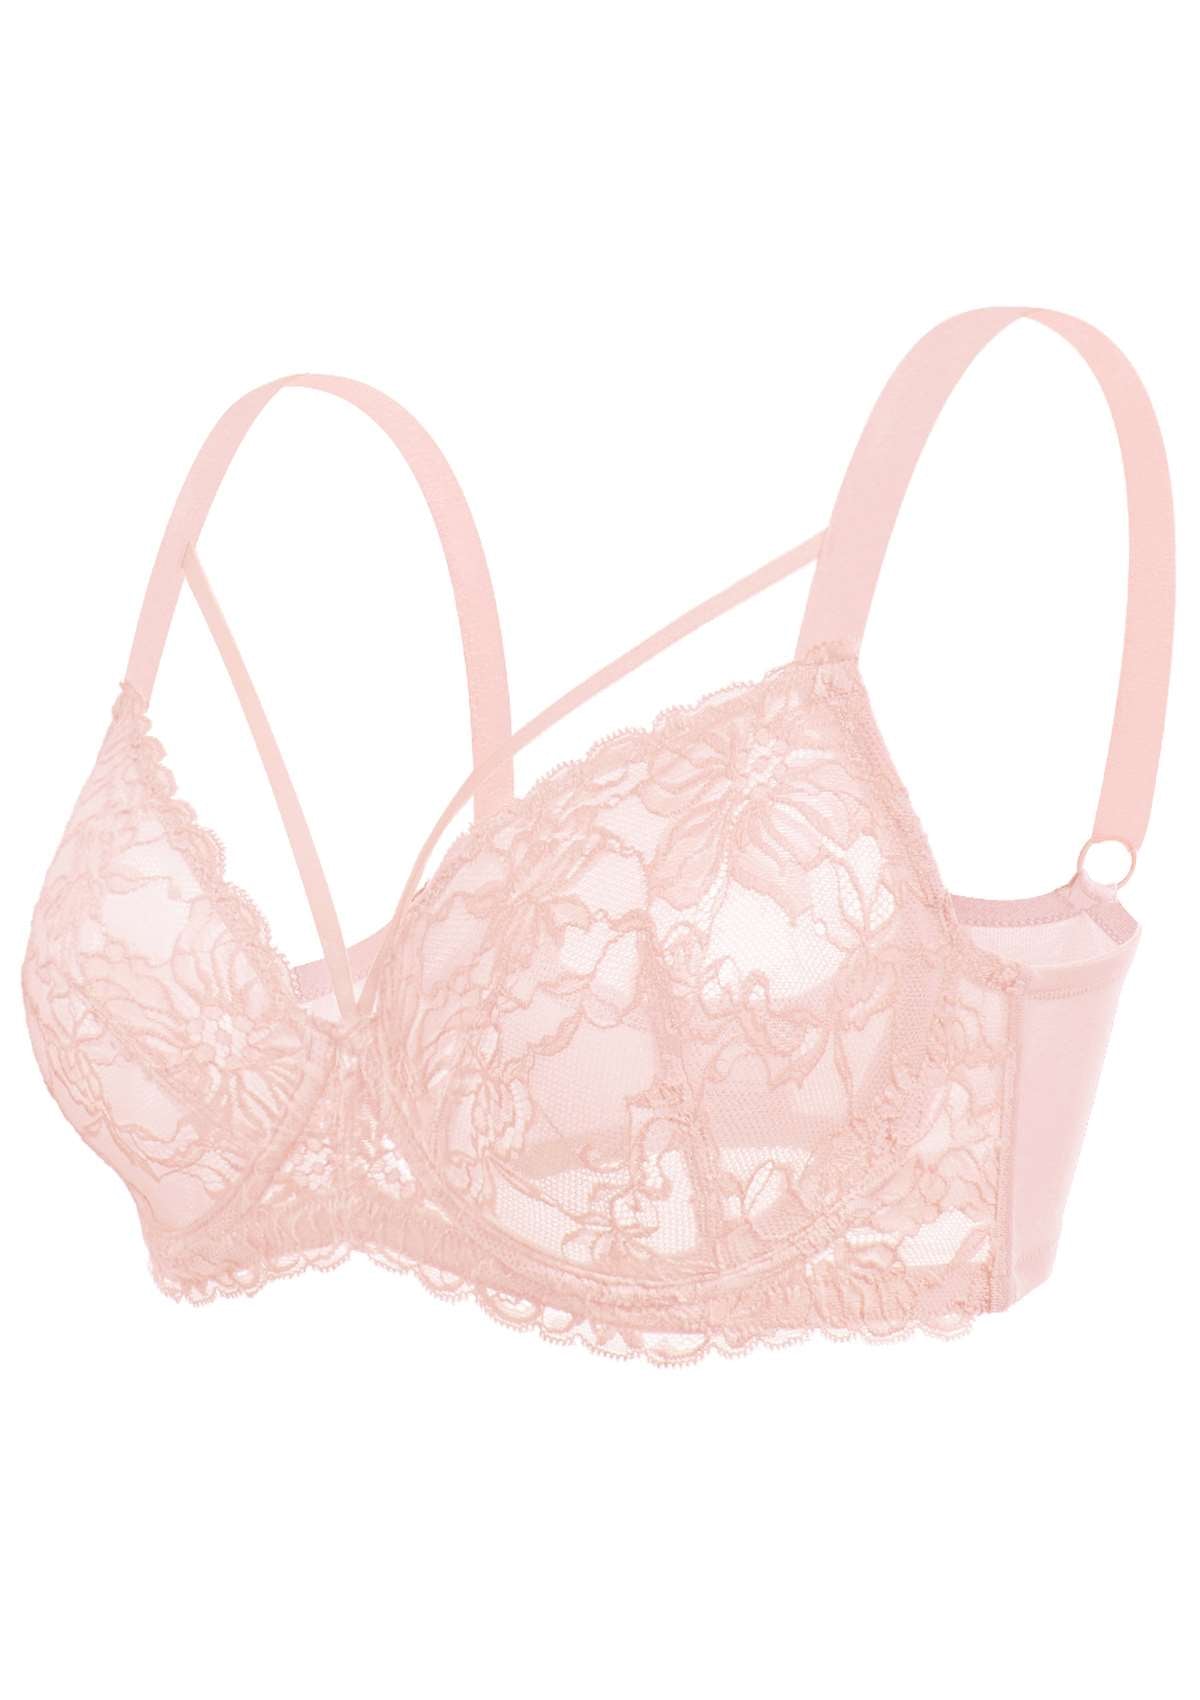 HSIA Pretty In Petals: Strappy Lace Sheer Bra For Side And Back Fat - Baby Pink / 40 / H